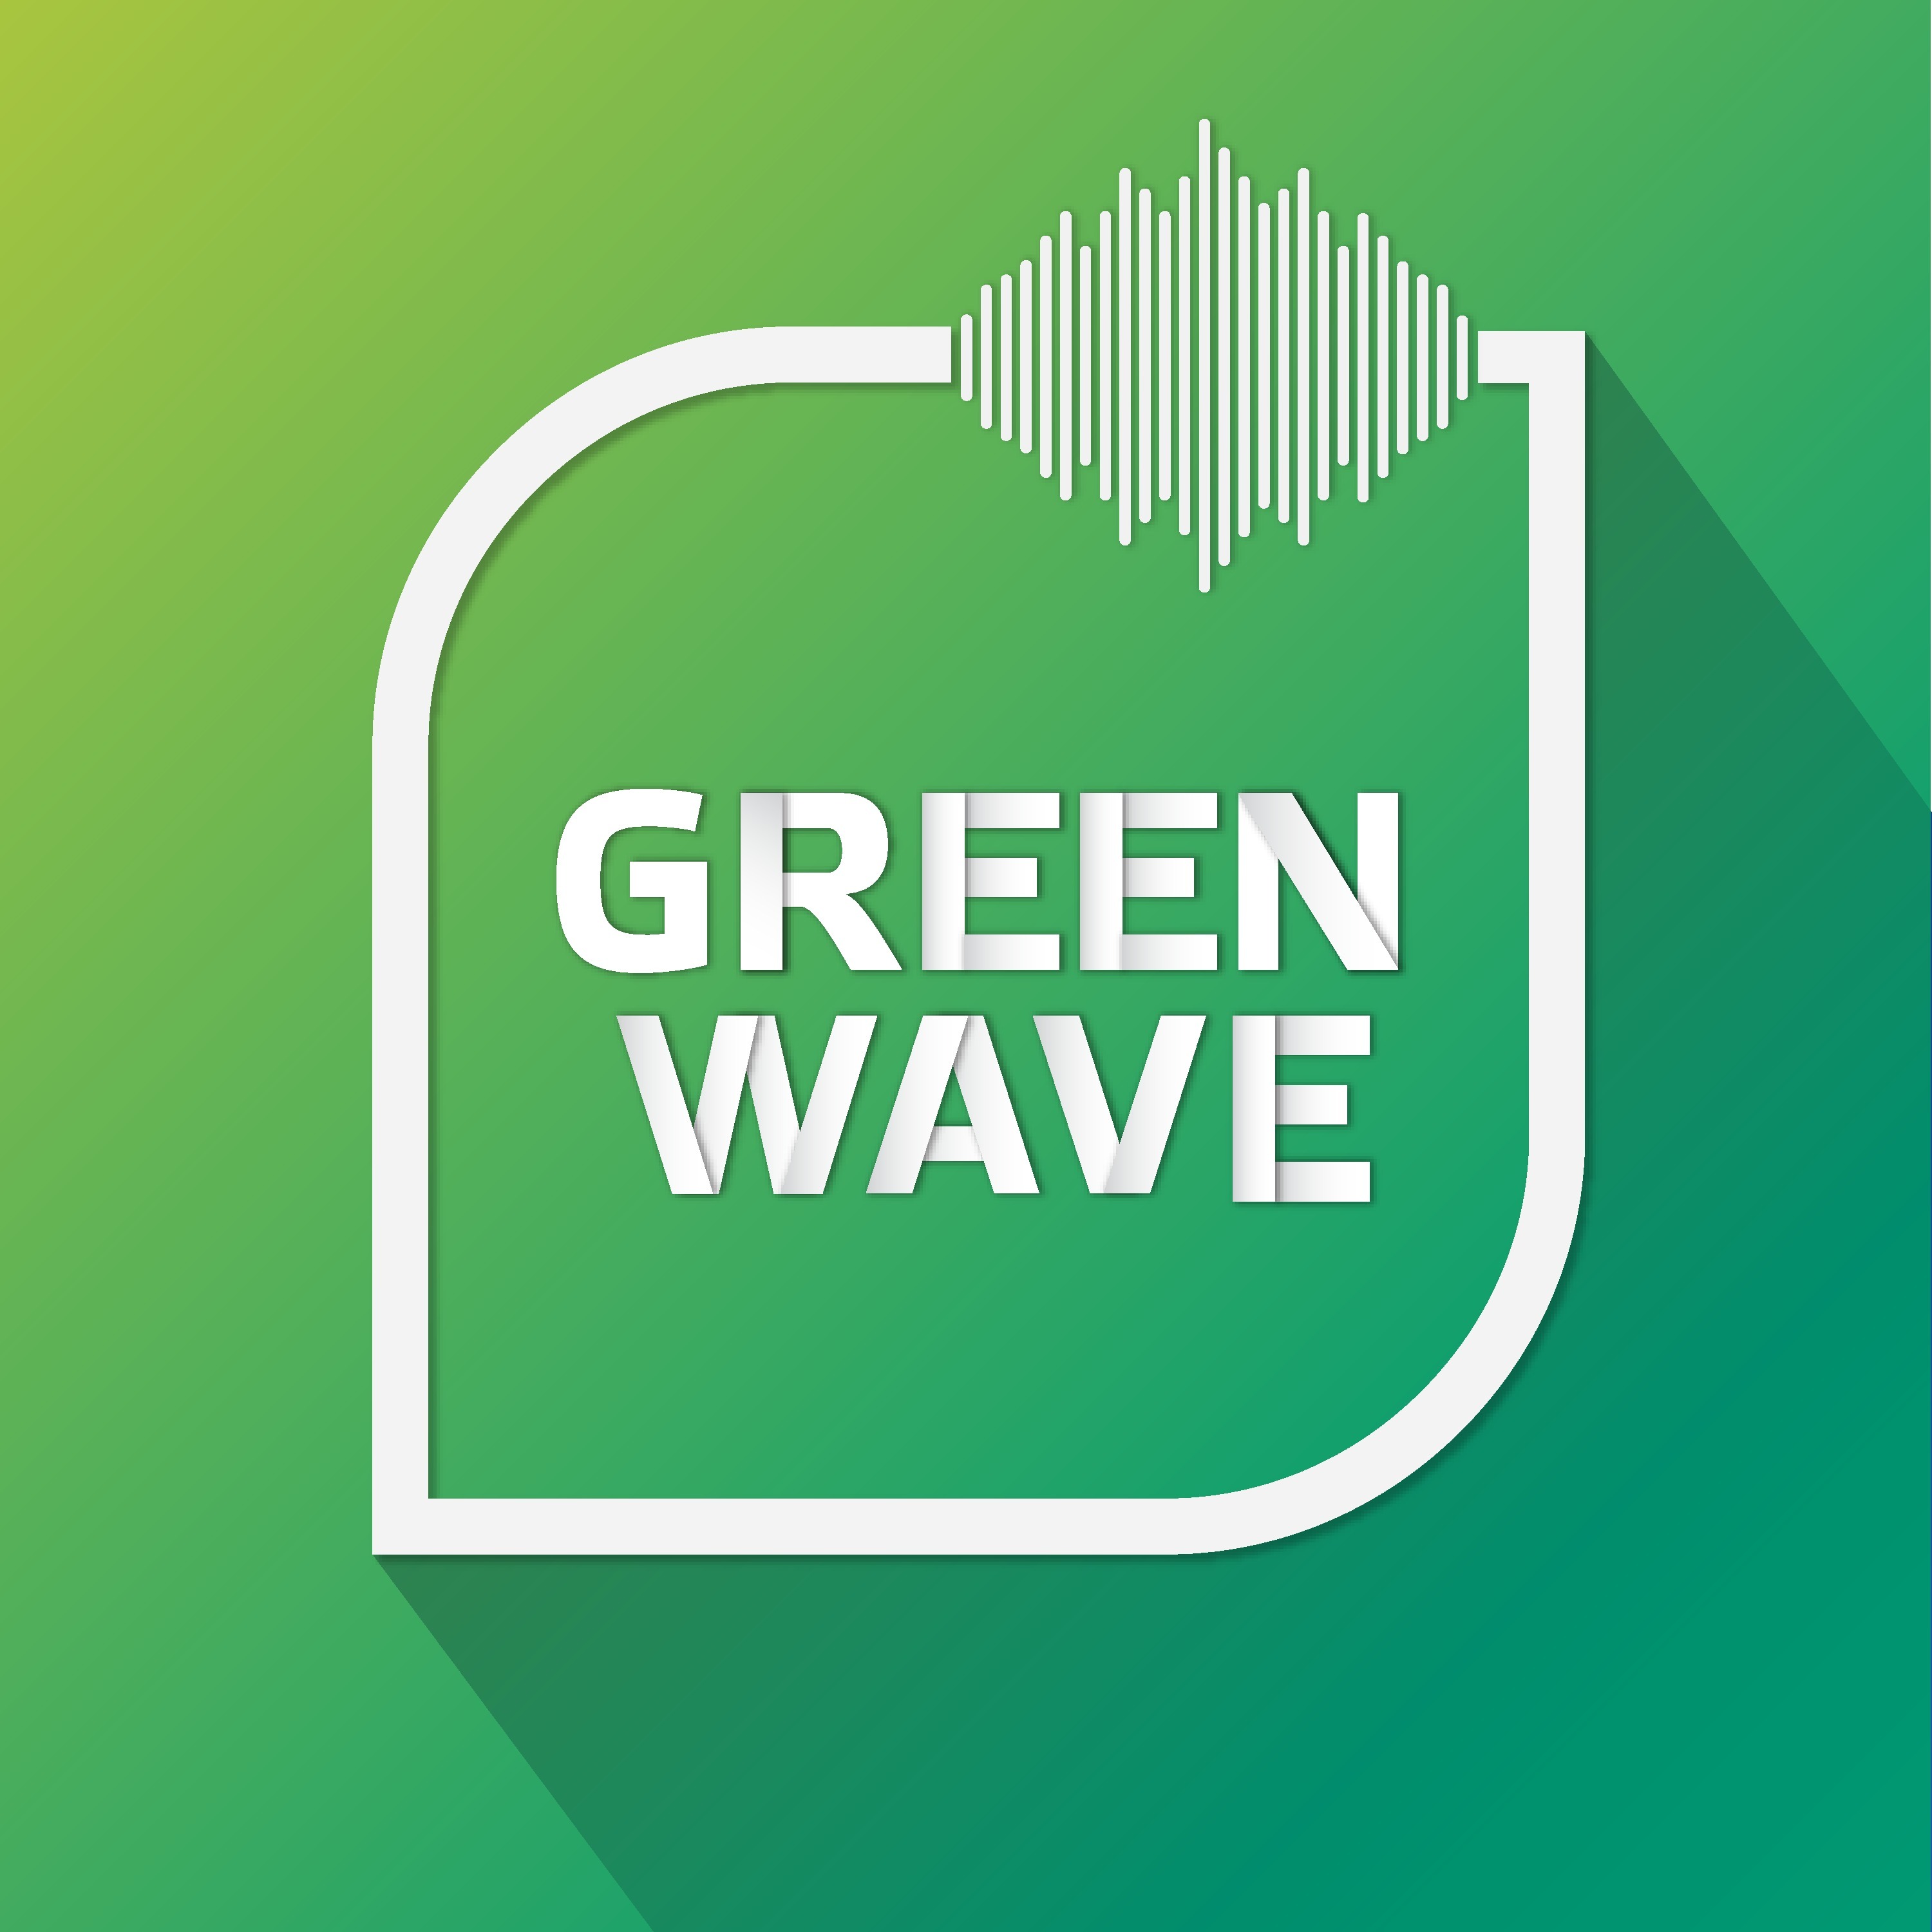 Youth Lead The Way On The Climate Emergency Green Wave Podcast - 